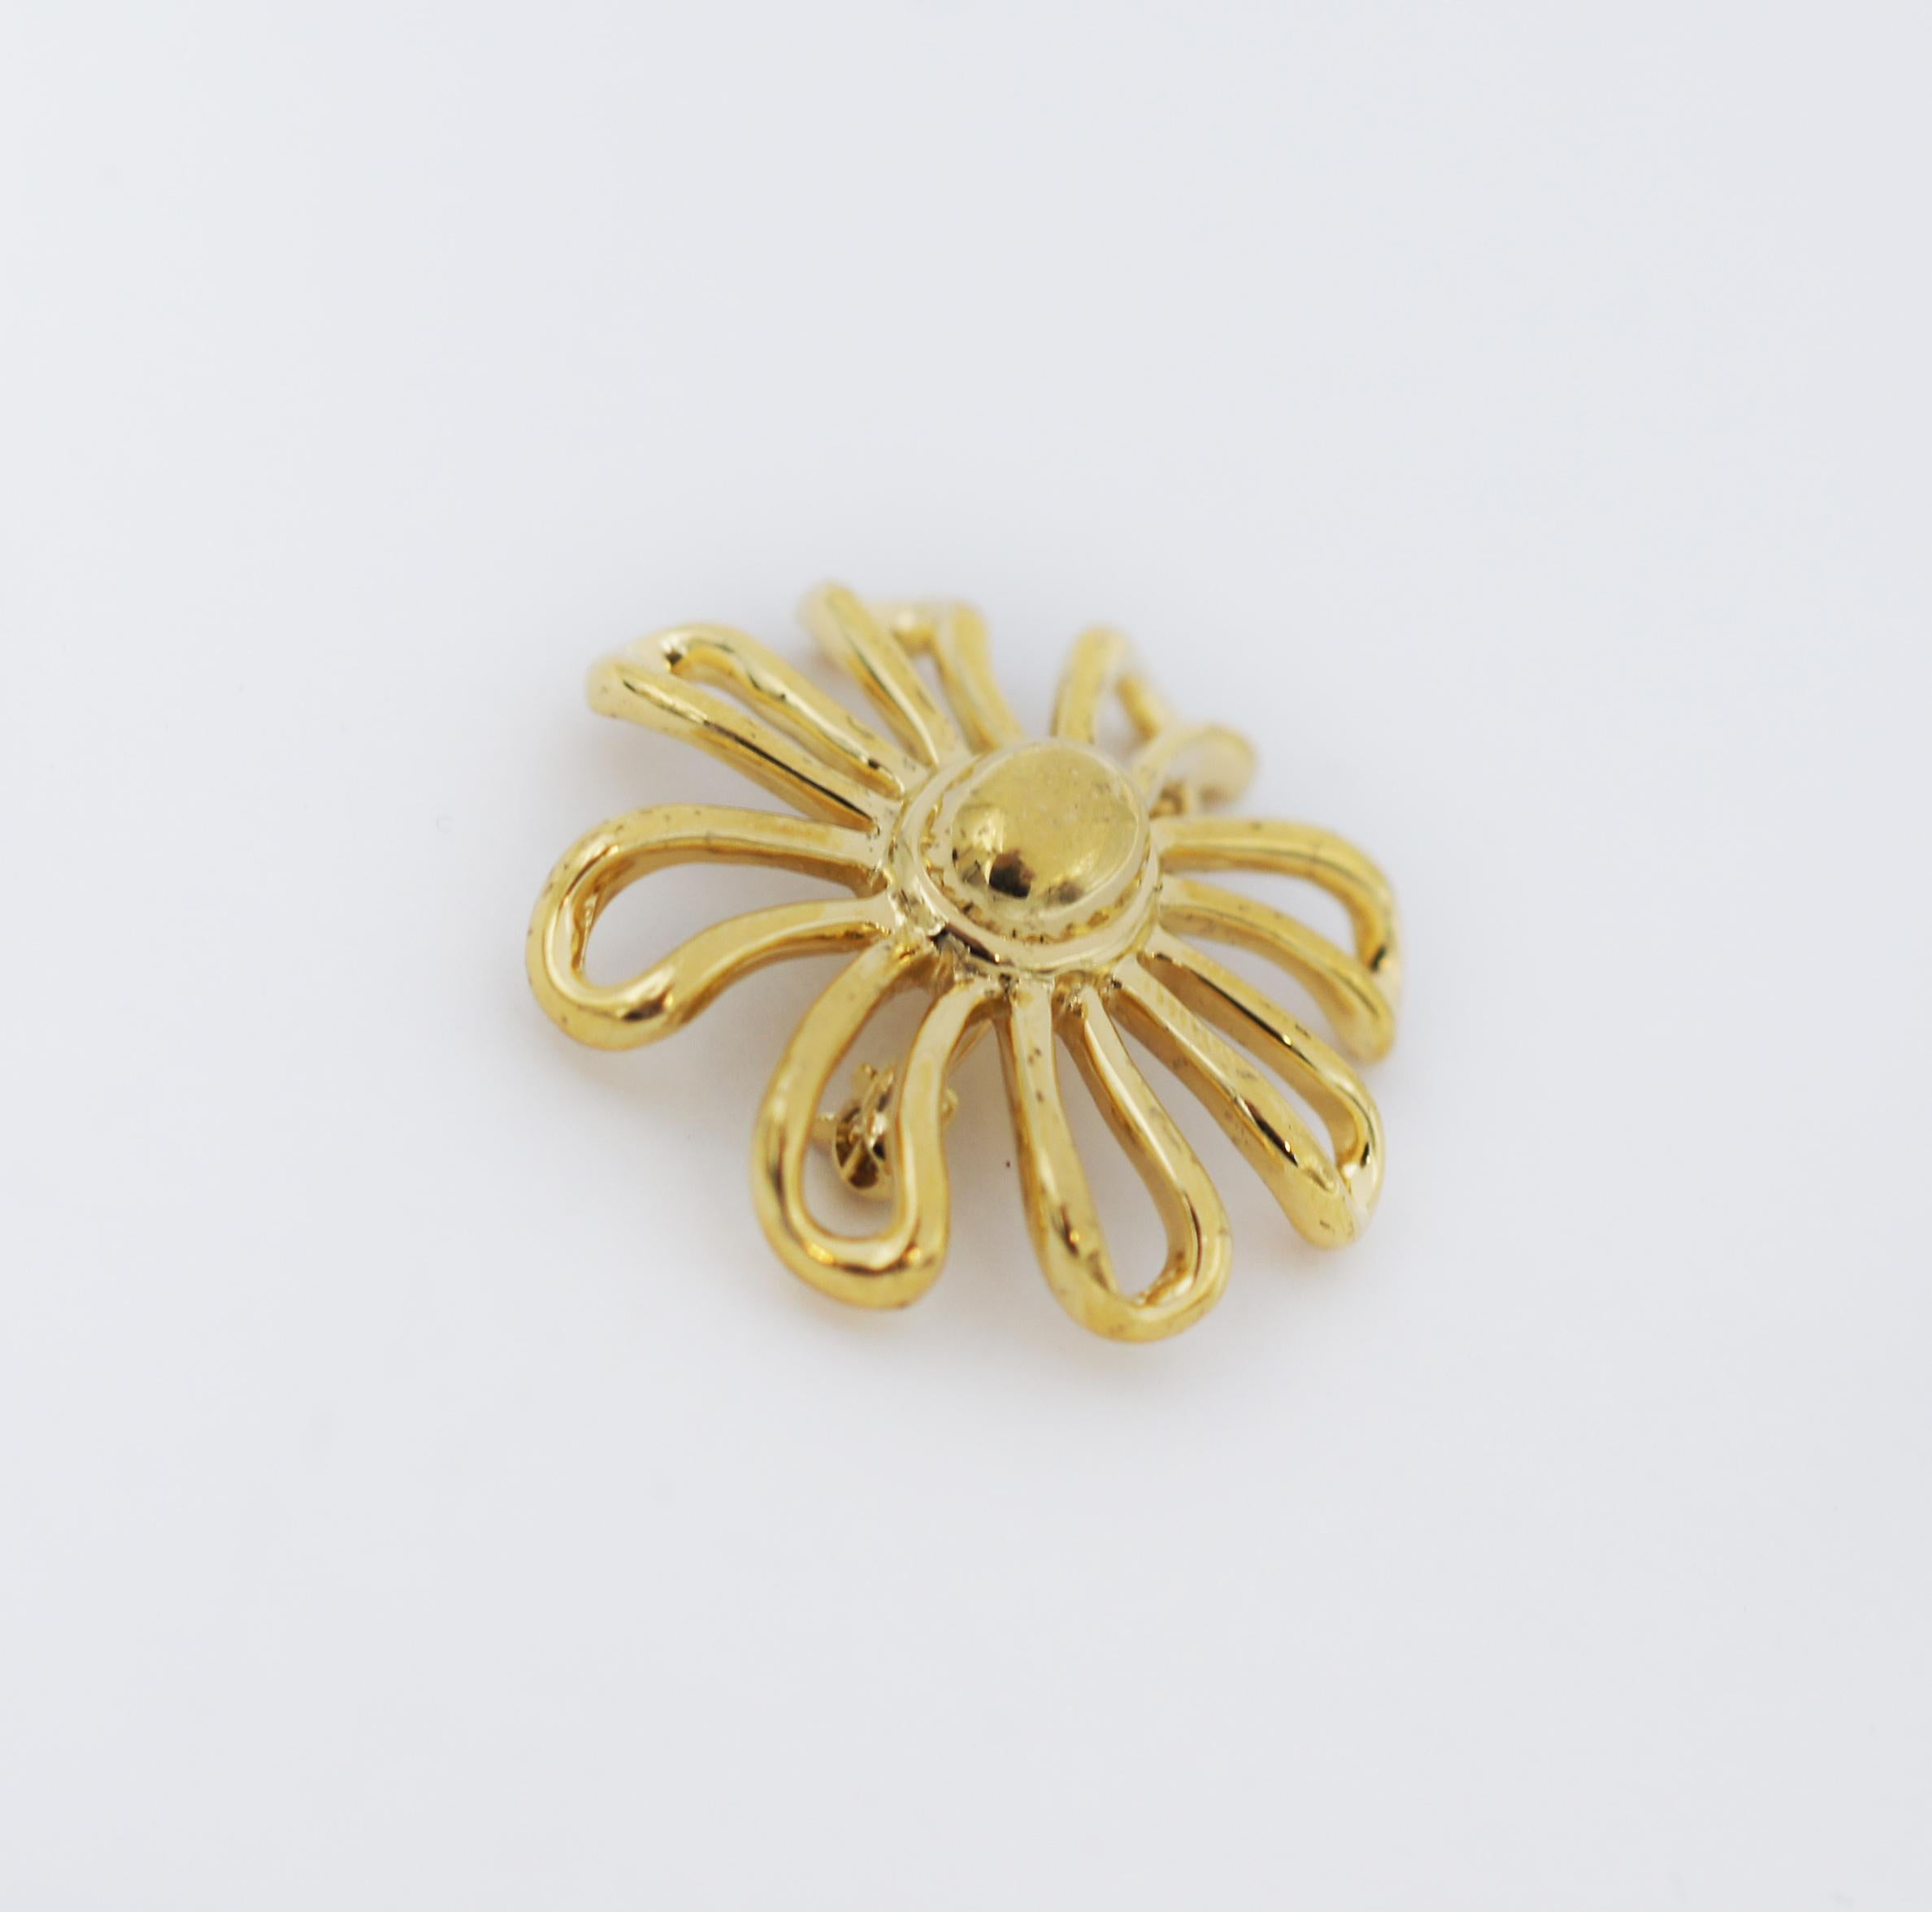 Tiffany & Co.
Vintage
Daisy Flower
Paloma Picasso collection
18k Yellow Gold
Hallmarked: (c) Tiffany & Co. 18K Paloma Picasso
Approx. 1.10